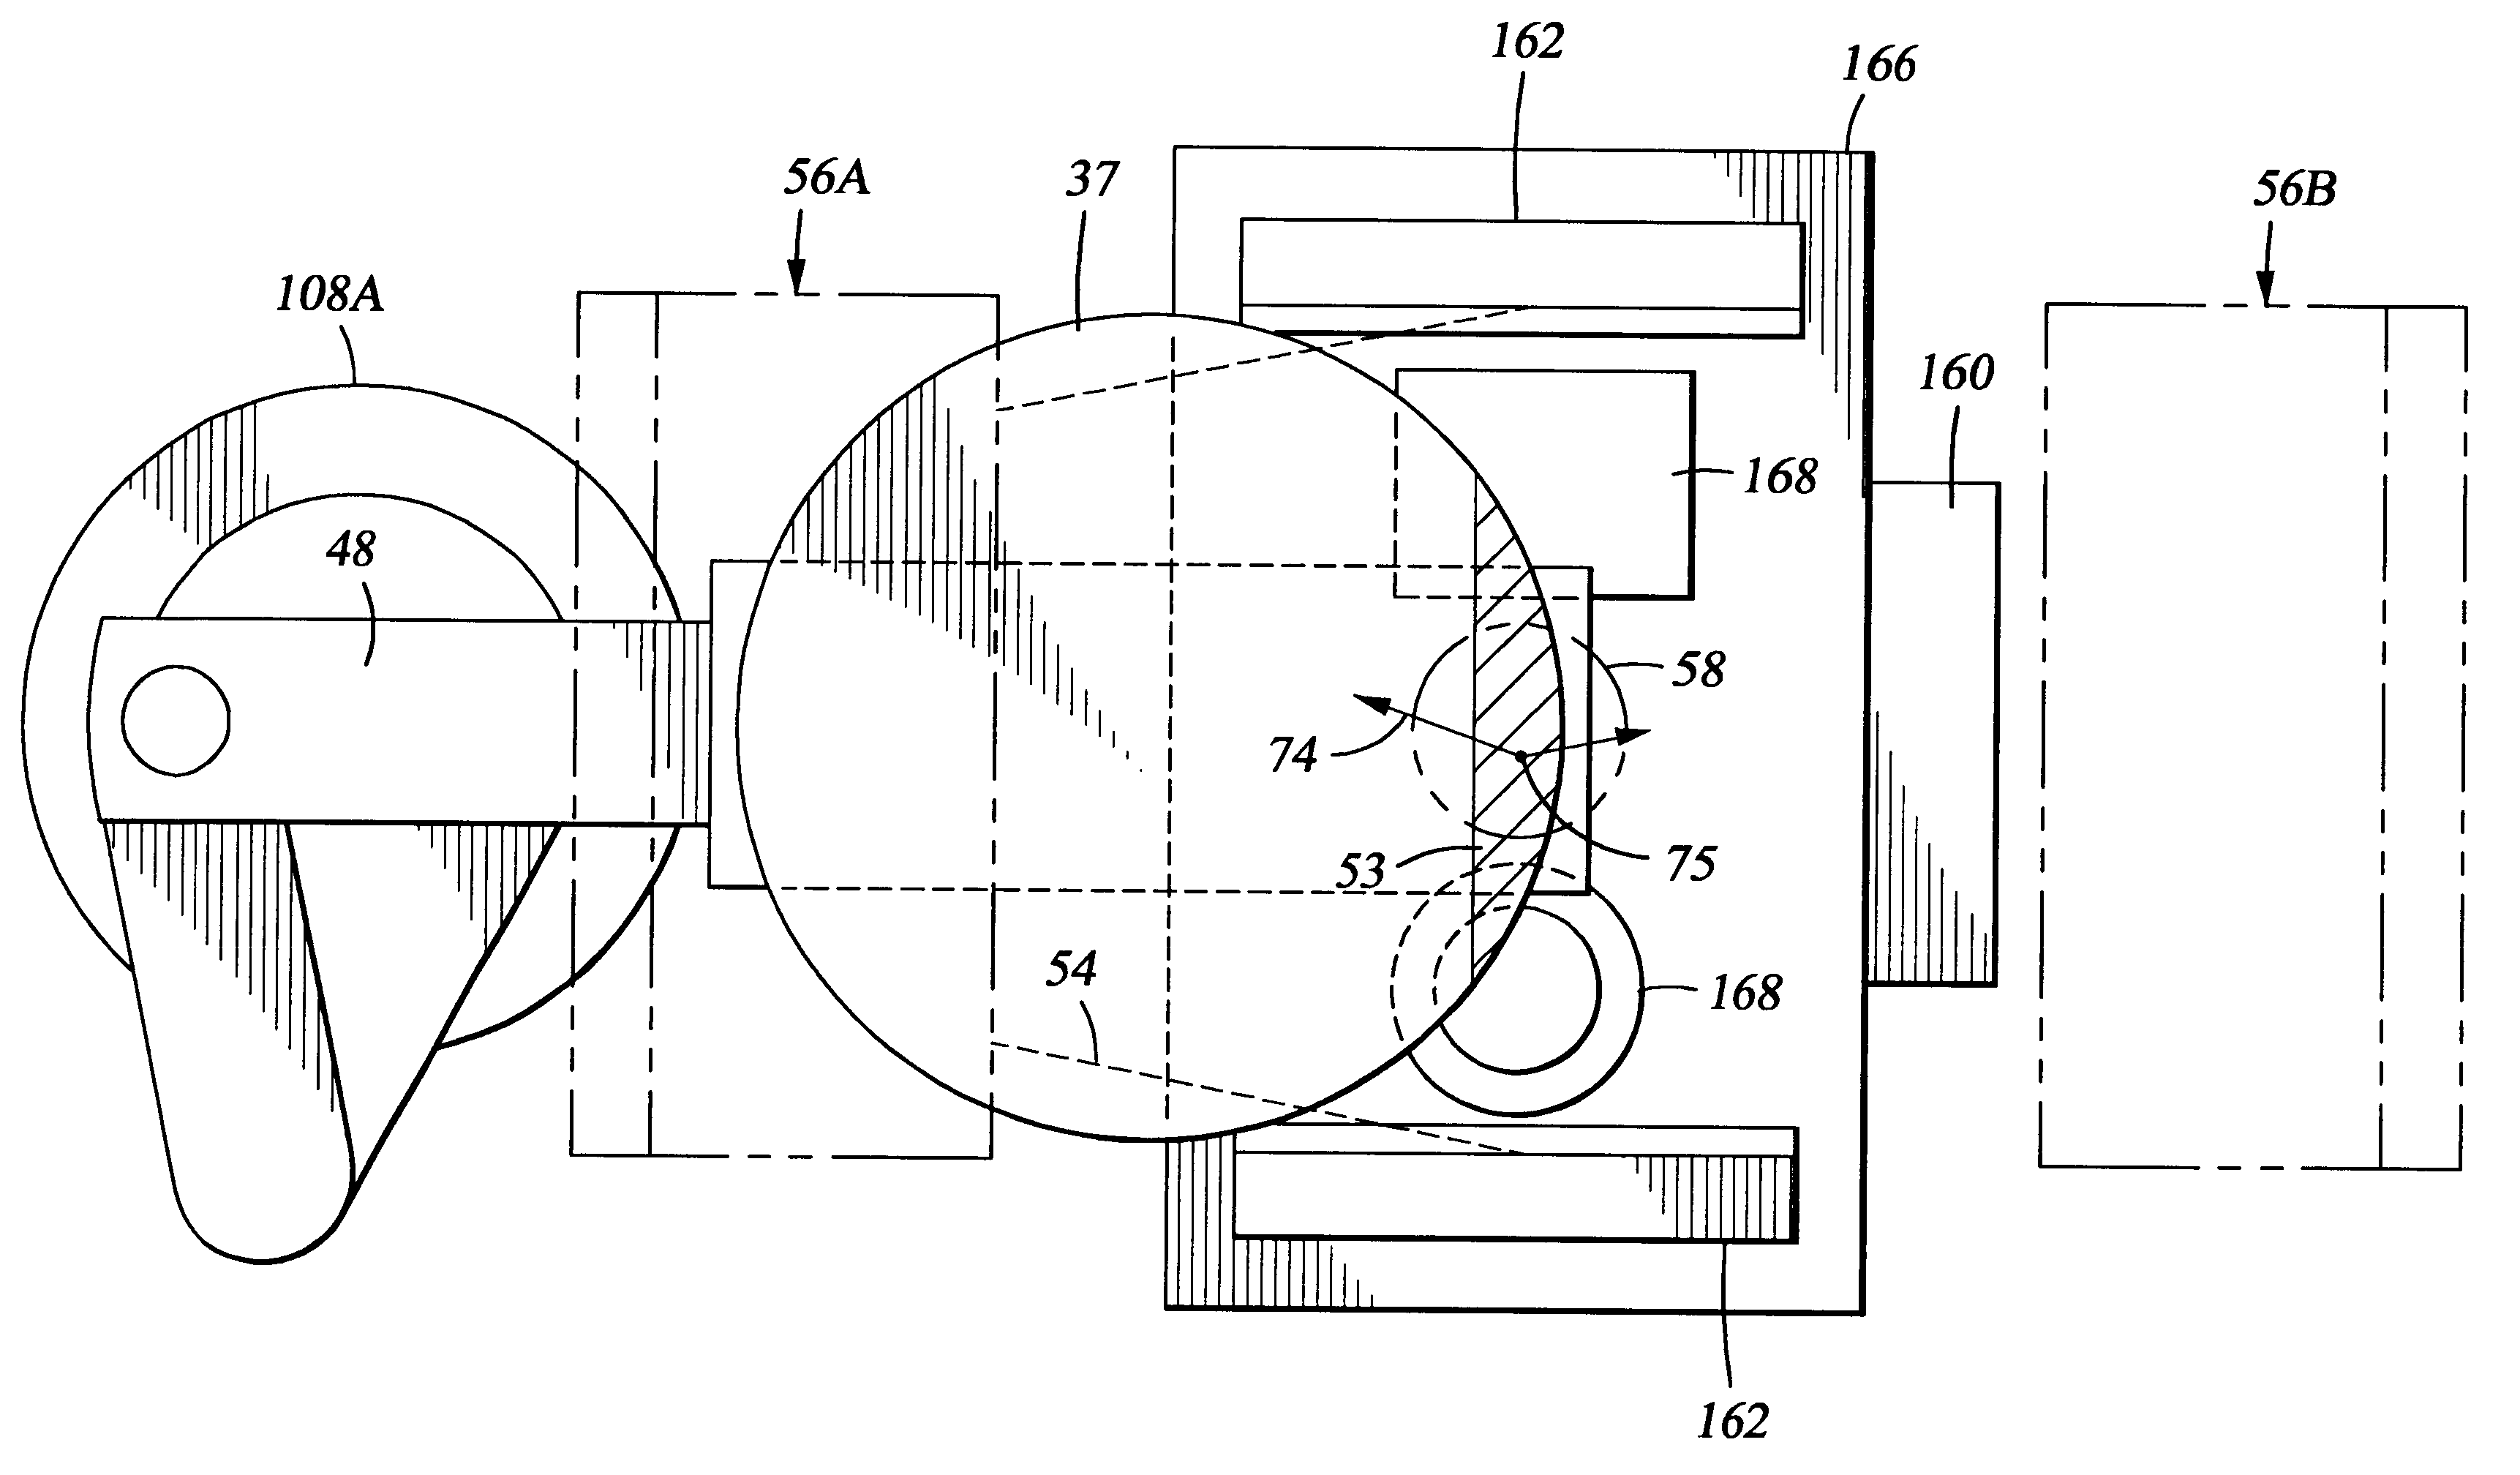 Method and apparatus for substrate surface inspection using spectral profiling techniques